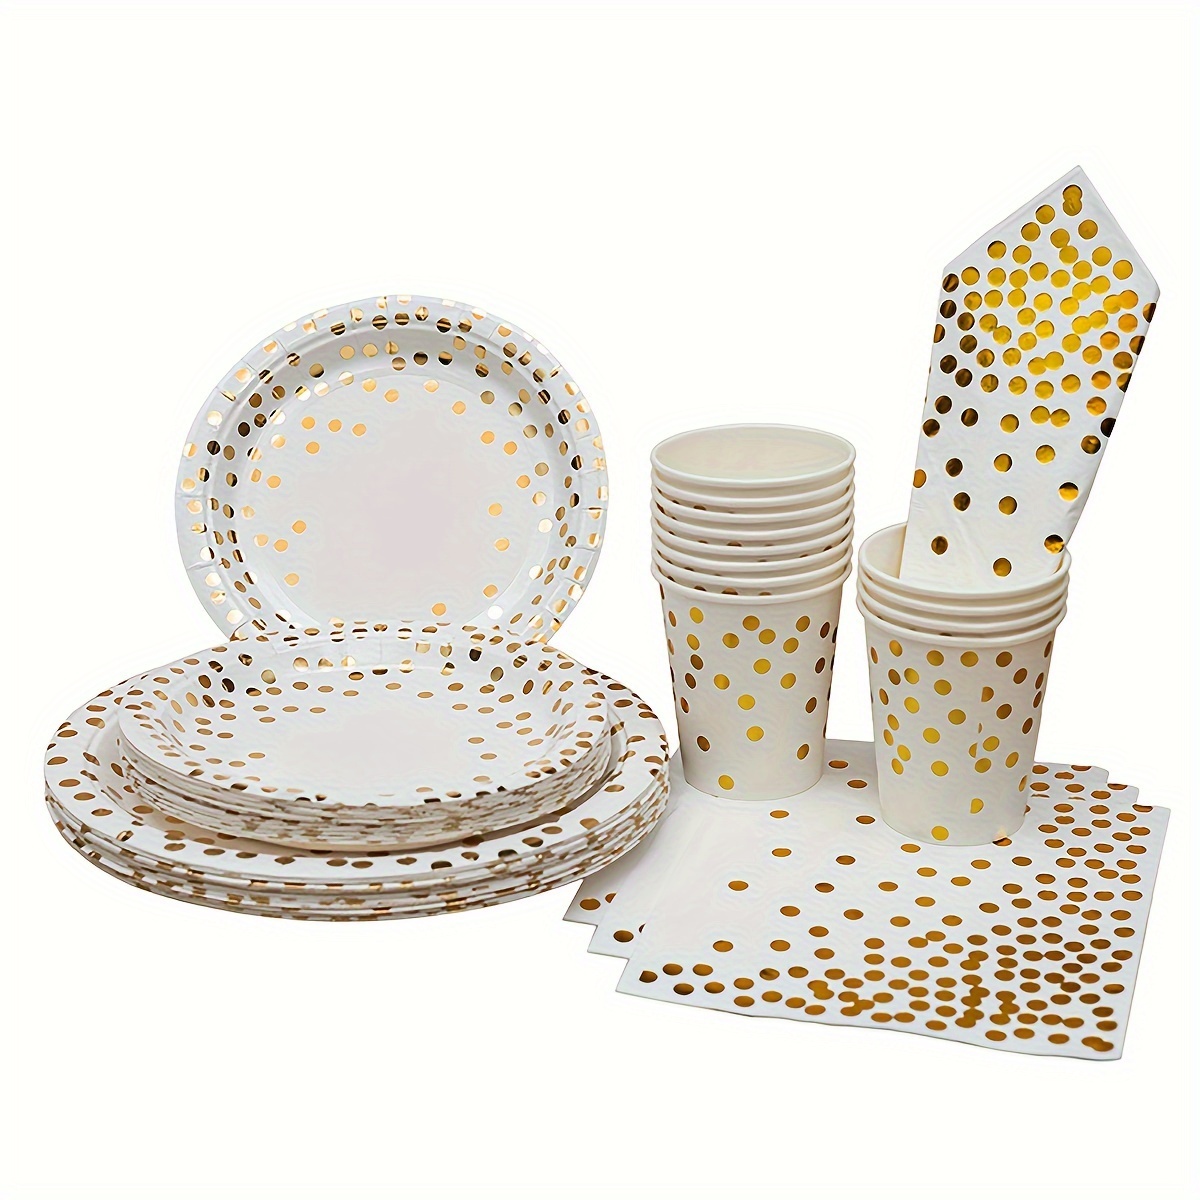 

80pcs, White Dot Bronzing Party Tableware Set, Disposable Dinnerware Set, Table Decor, Birthday Decor, Picnic Utensil, Scene Decor, Mother's Day Party Atmosphere Props, Holiday Supplies